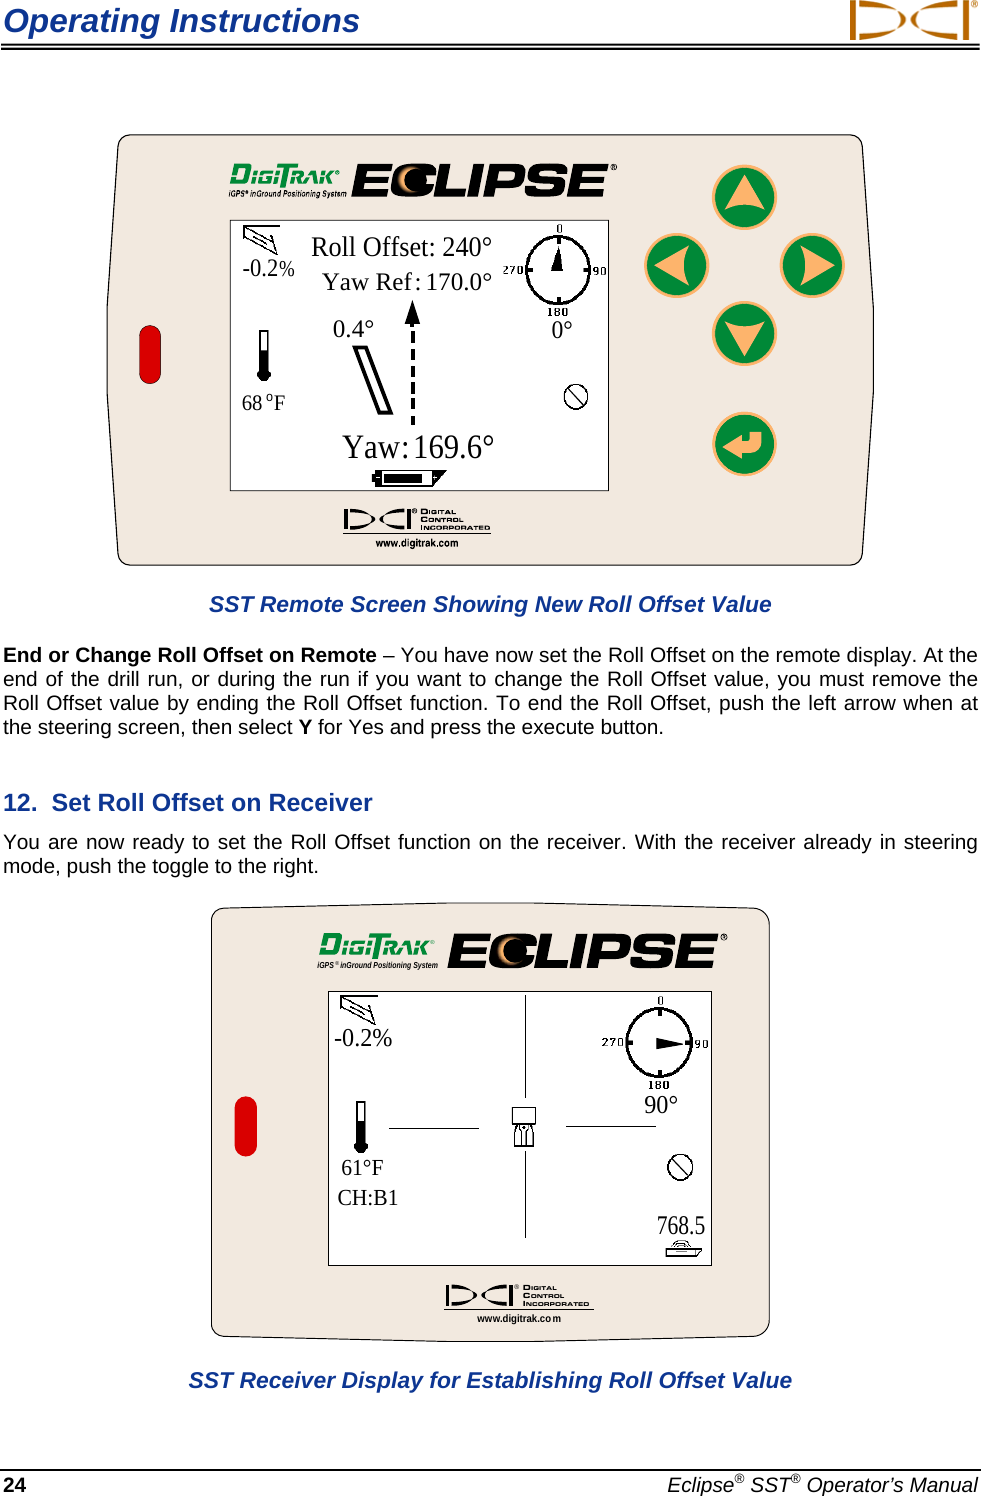 Operating Instructions  -0.2%68oFYaw Ref: 170.0°Yaw:169.6°0.4°0°Roll Offset: 240° SST Remote Screen Showing New Roll Offset Value End or Change Roll Offset on Remote – You have now set the Roll Offset on the remote display. At the end of the drill run, or during the run if you want to change the Roll Offset value, you must remove the Roll Offset value by ending the Roll Offset function. To end the Roll Offset, push the left arrow when at the steering screen, then select Y for Yes and press the execute button. 12.  Set Roll Offset on Receiver You are now ready to set the Roll Offset function on the receiver. With the receiver already in steering mode, push the toggle to the right.  iGPS®inGround Positioning System®DIGITALCONTROLINCORPORATED®www.digitrak.co mCH:B1768.5-0.2%90°61°F SST Receiver Display for Establishing Roll Offset Value 24  Eclipse® SST® Operator’s Manual 